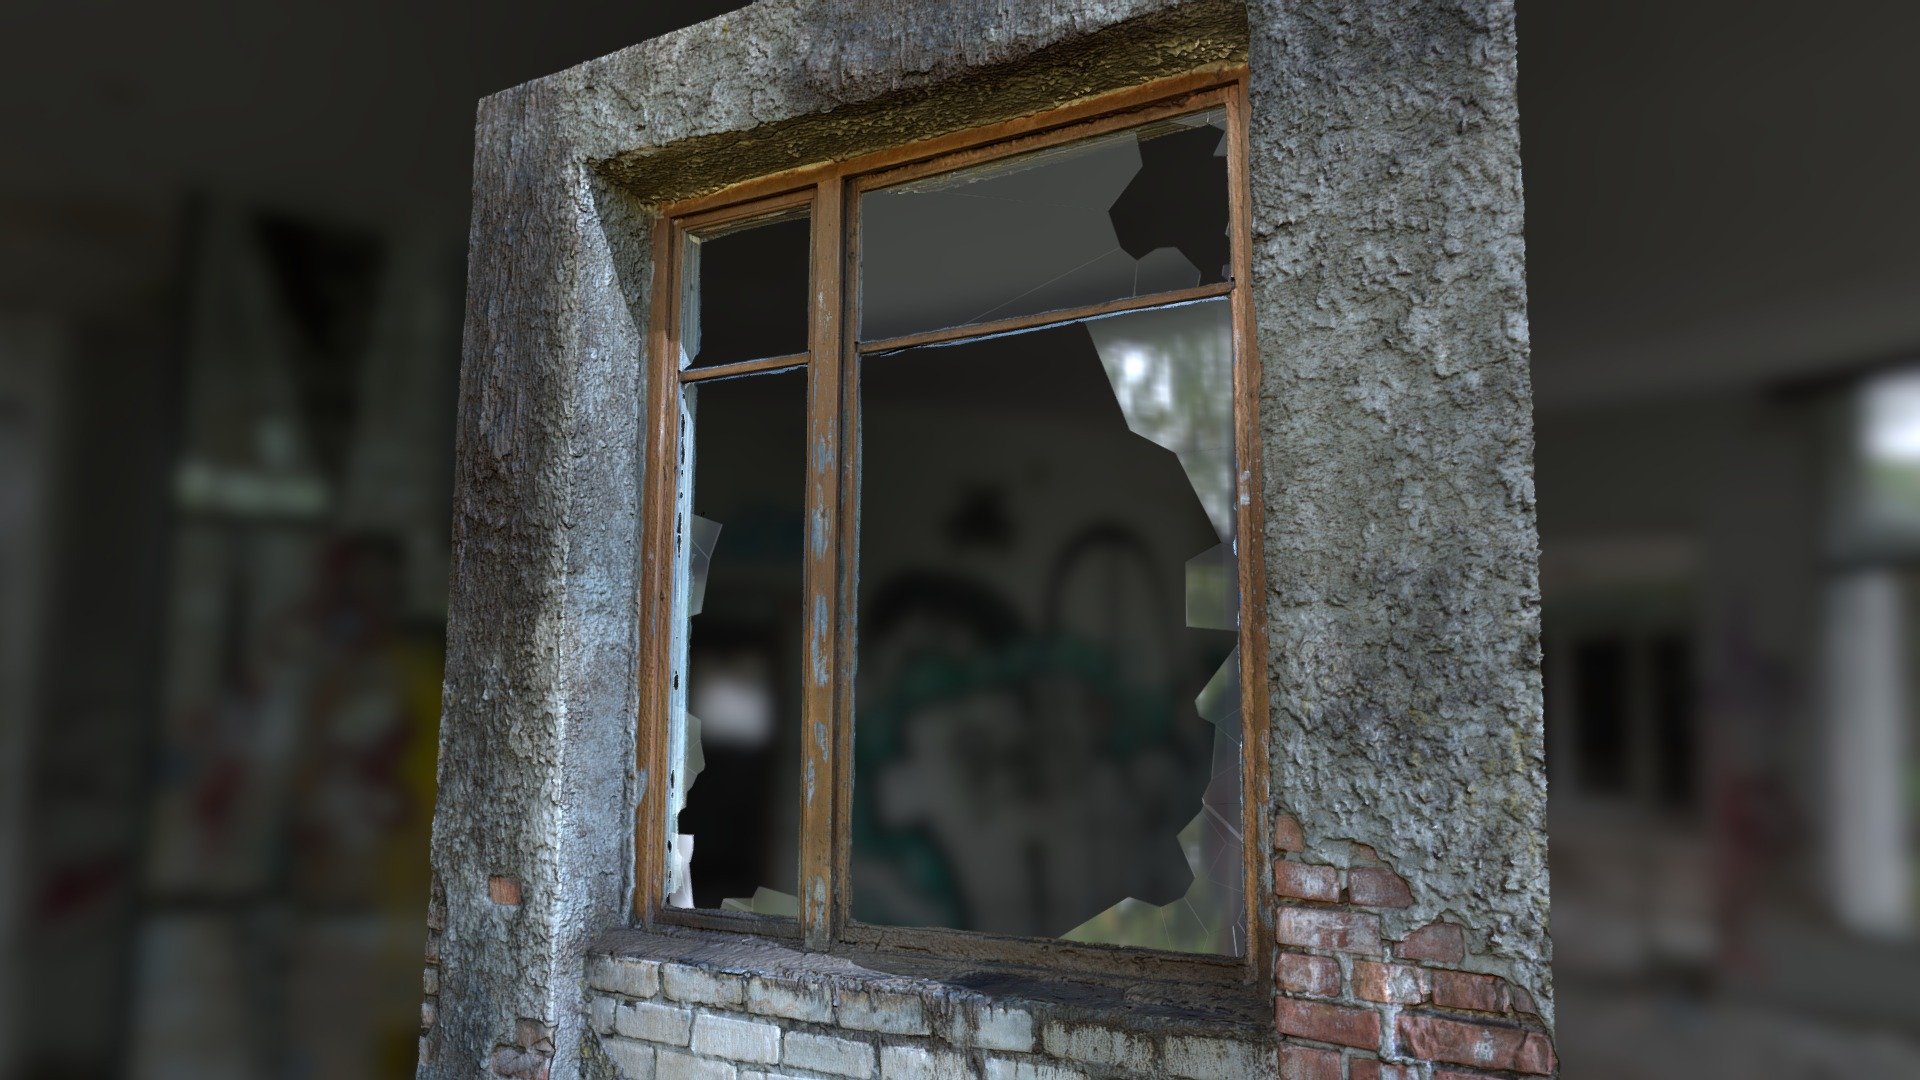 Old, abandoned, broken brown wooden window with some glass remaining in the frame.
Wall made of bricks and concrete 3d model